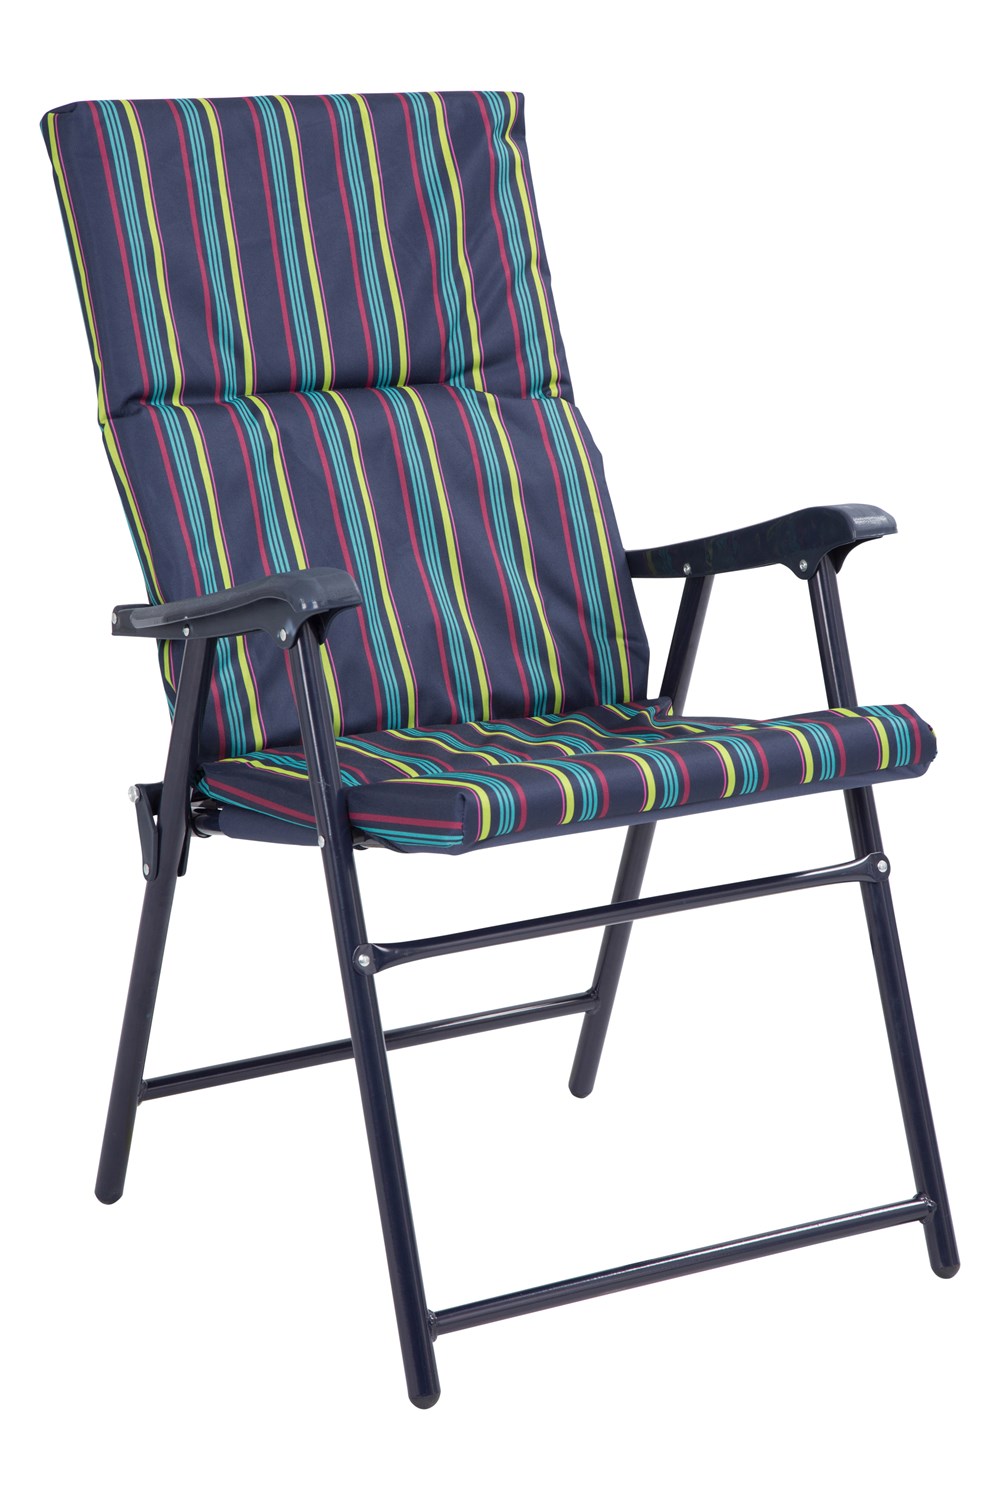 022673 Tur Padded Folding Chair Patterned Har Ss17 1 ?w=1000